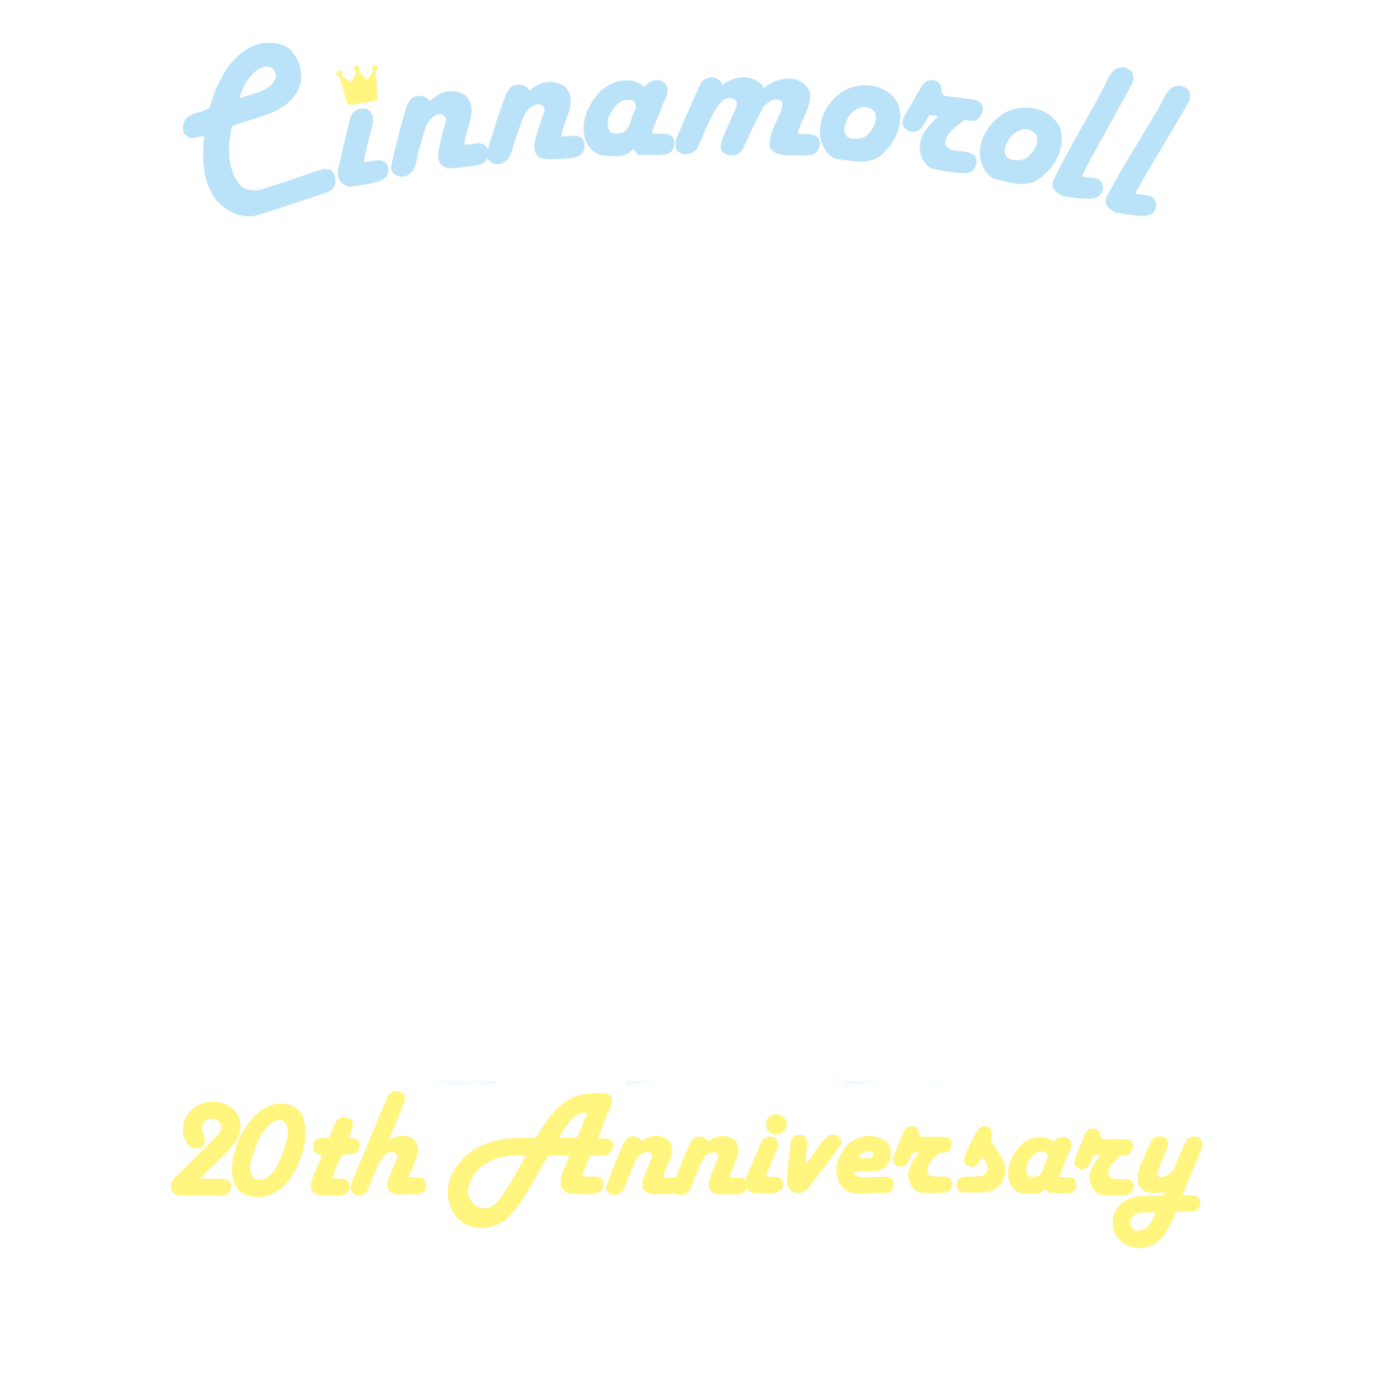 Cinamoroll 20th Anniversary Let's color the world in hues of Cinamoroll blue!